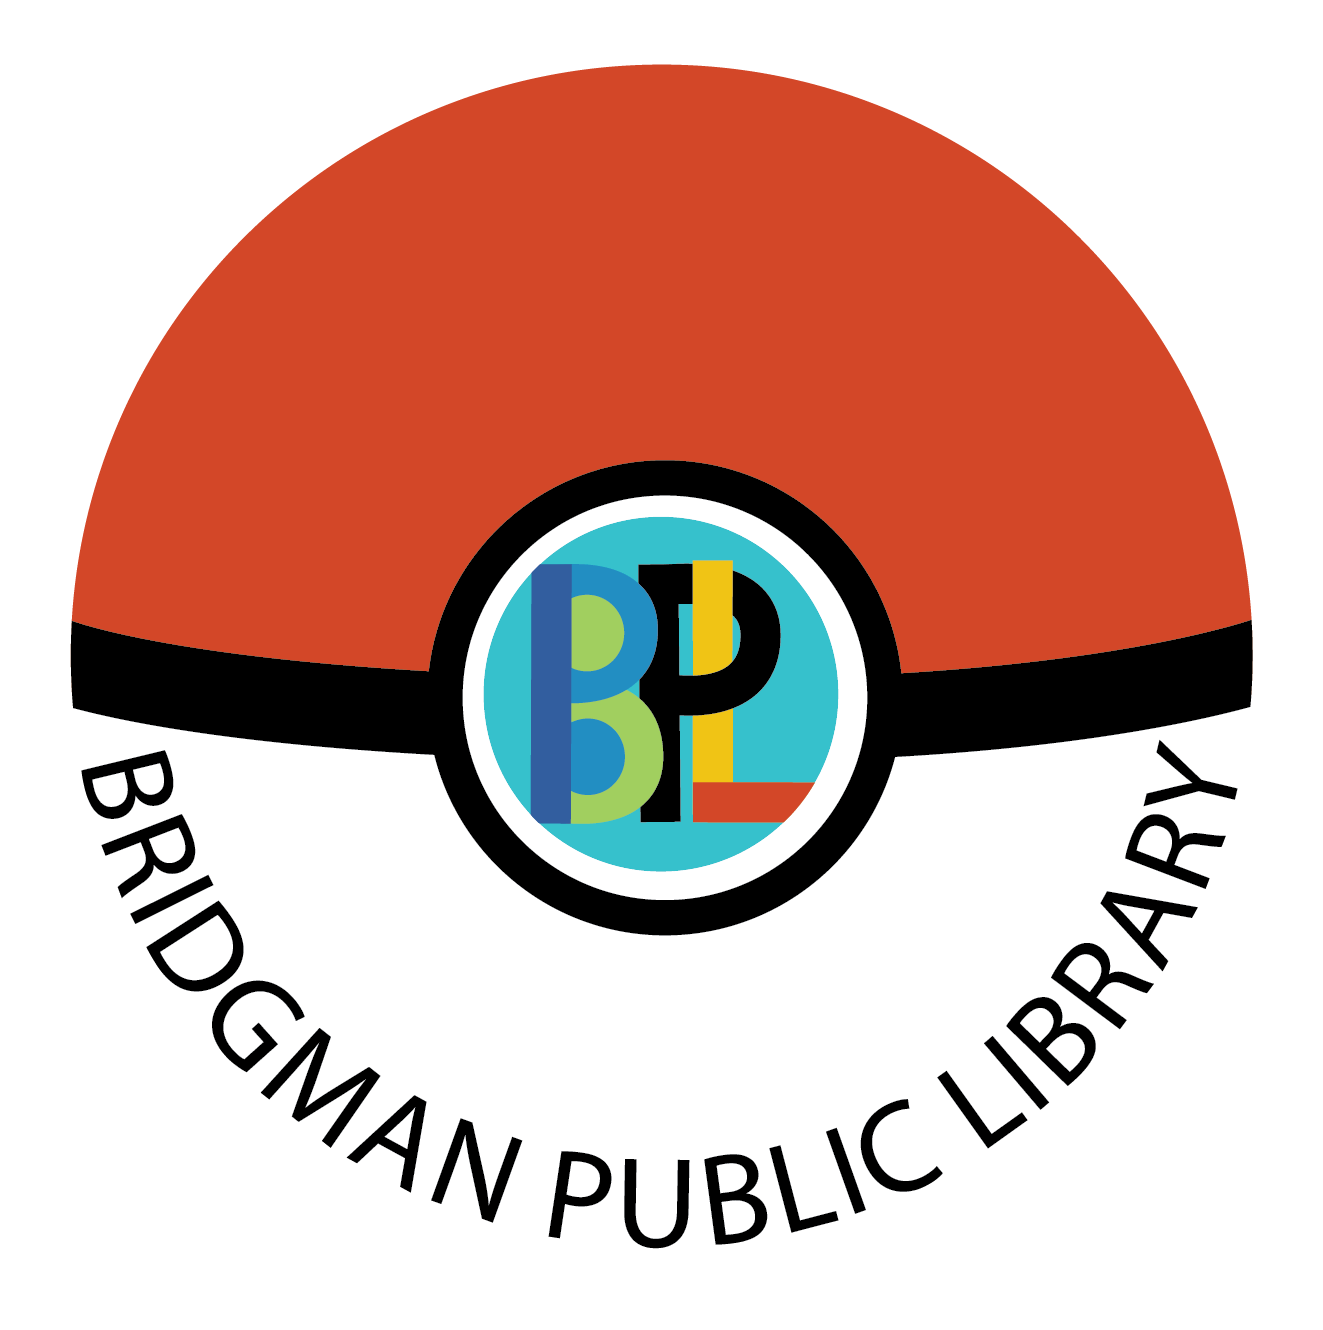 An image of a pokeball with the BPL logo.